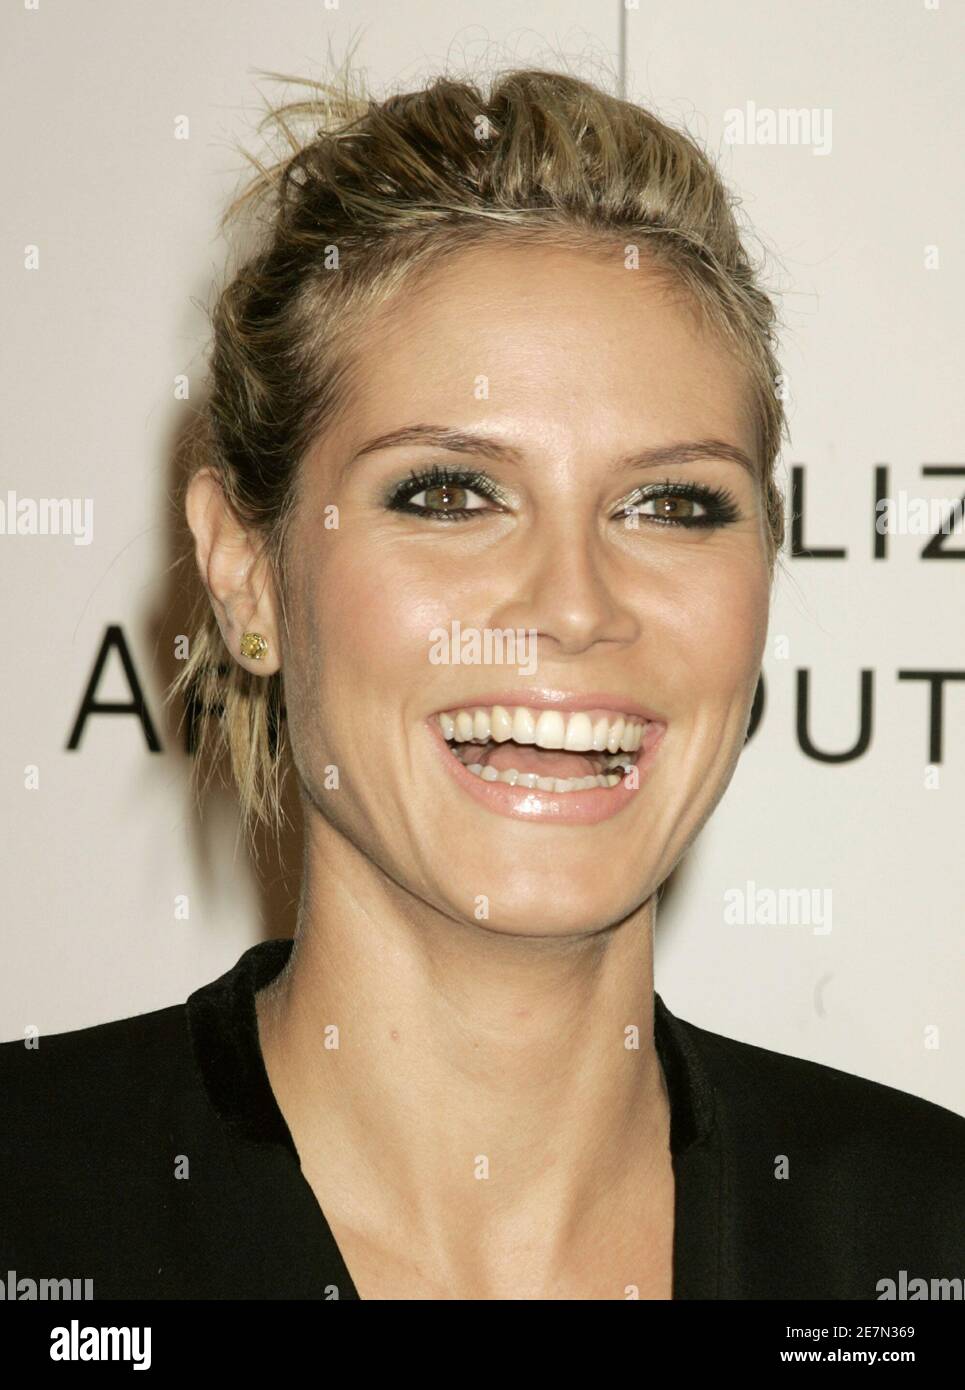 Supermodel Heidi Klum poses as she arrives at a pre-Oscar benefit Vanity Fair's Amped for Africa California benefit in Los Angeles March 2, 2006. [Academy Award nominee for best actress Charlize Theron hosted the event which spotlights the Charlize Theron African Outreach Project benefitting Oprah Winfrey's Angel Network, that helps support vulnerable children and their families in rural South Africa.] Stock Photo